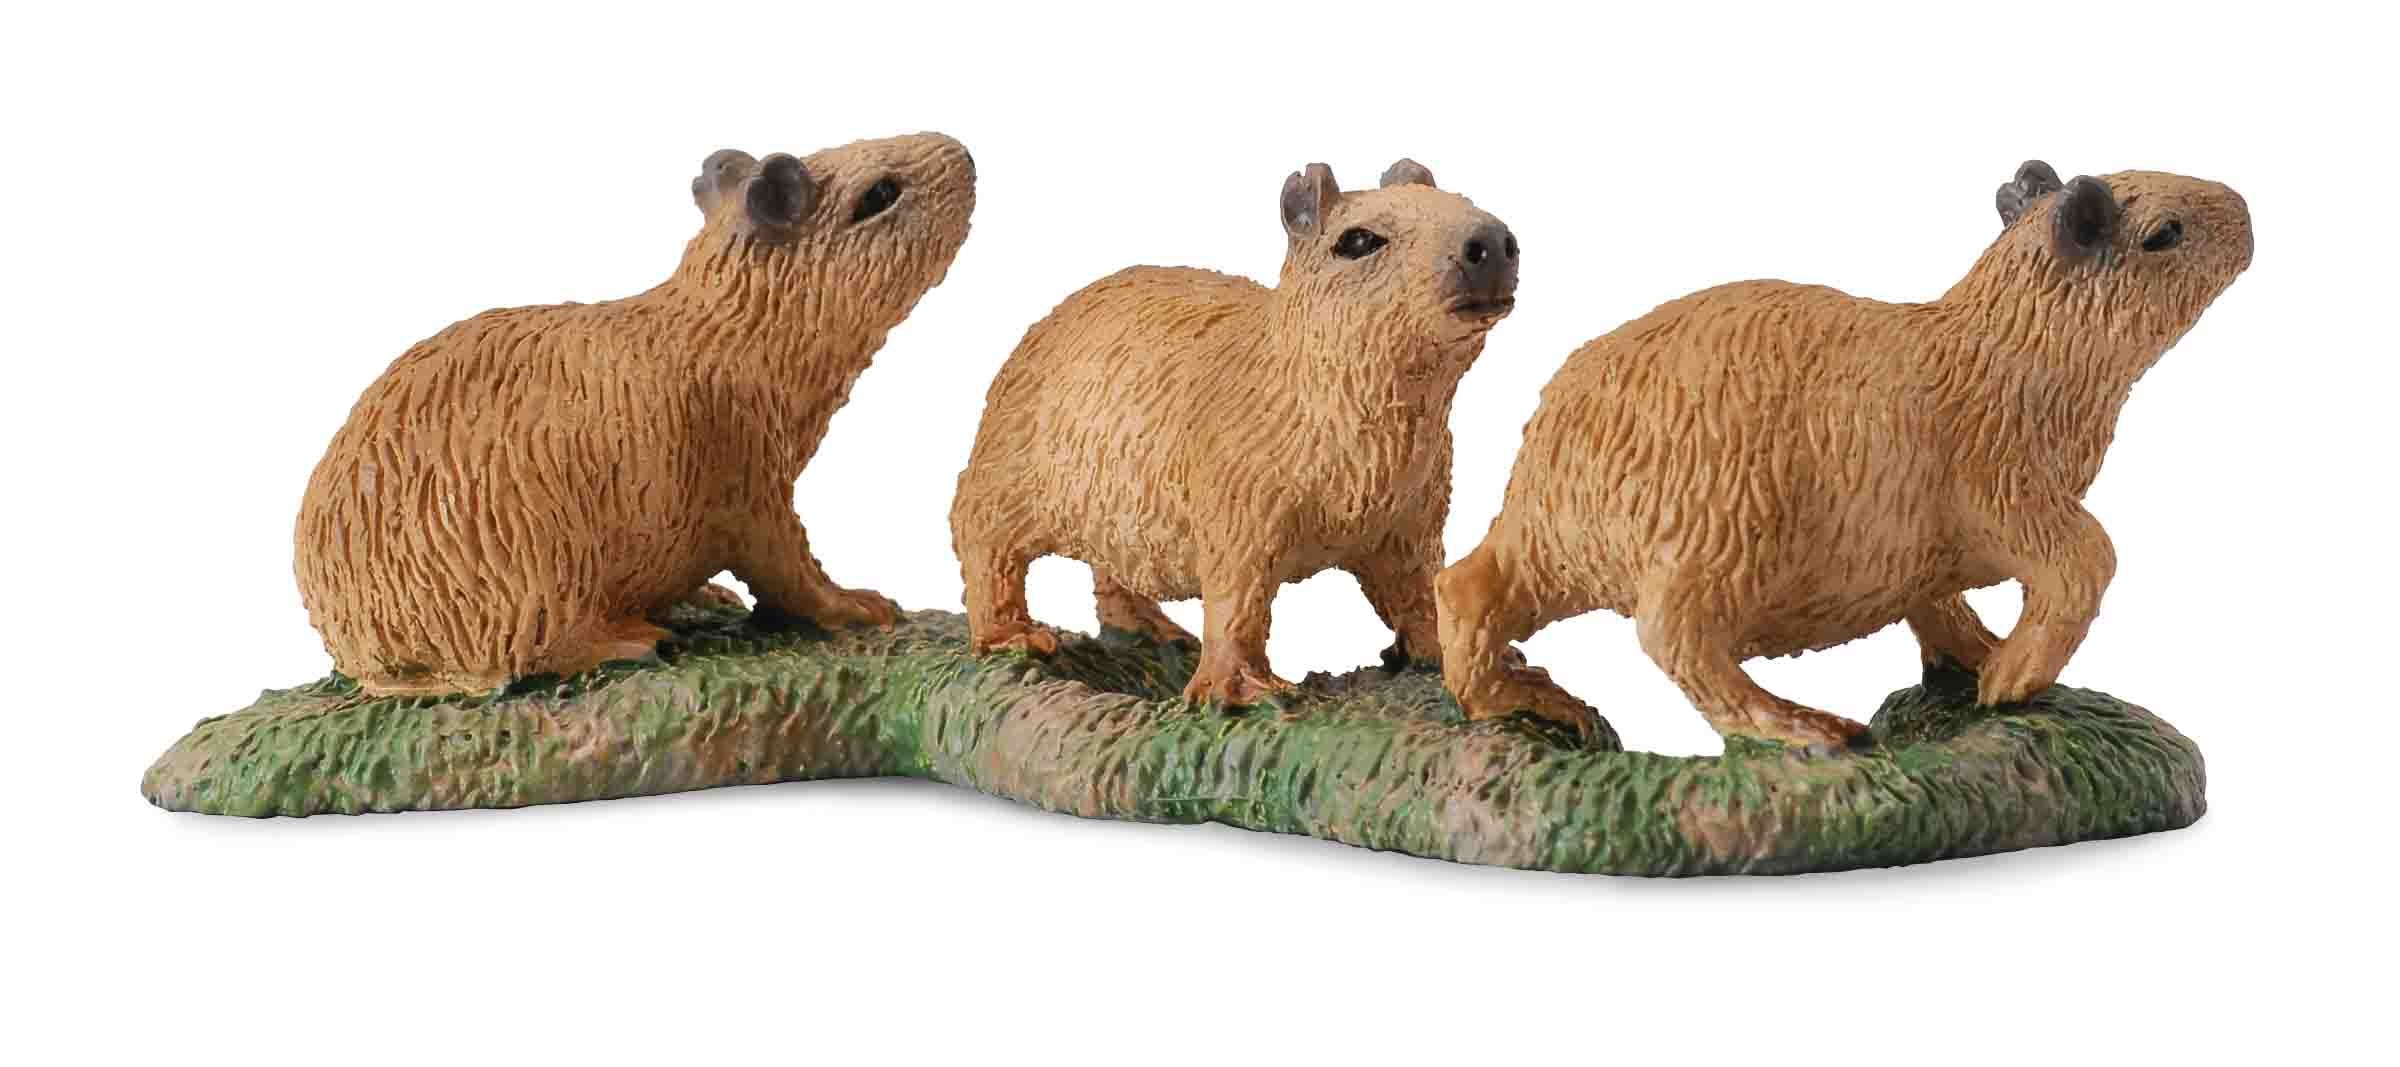 Capybara Figures Toys Miniature Science Educational Toy for